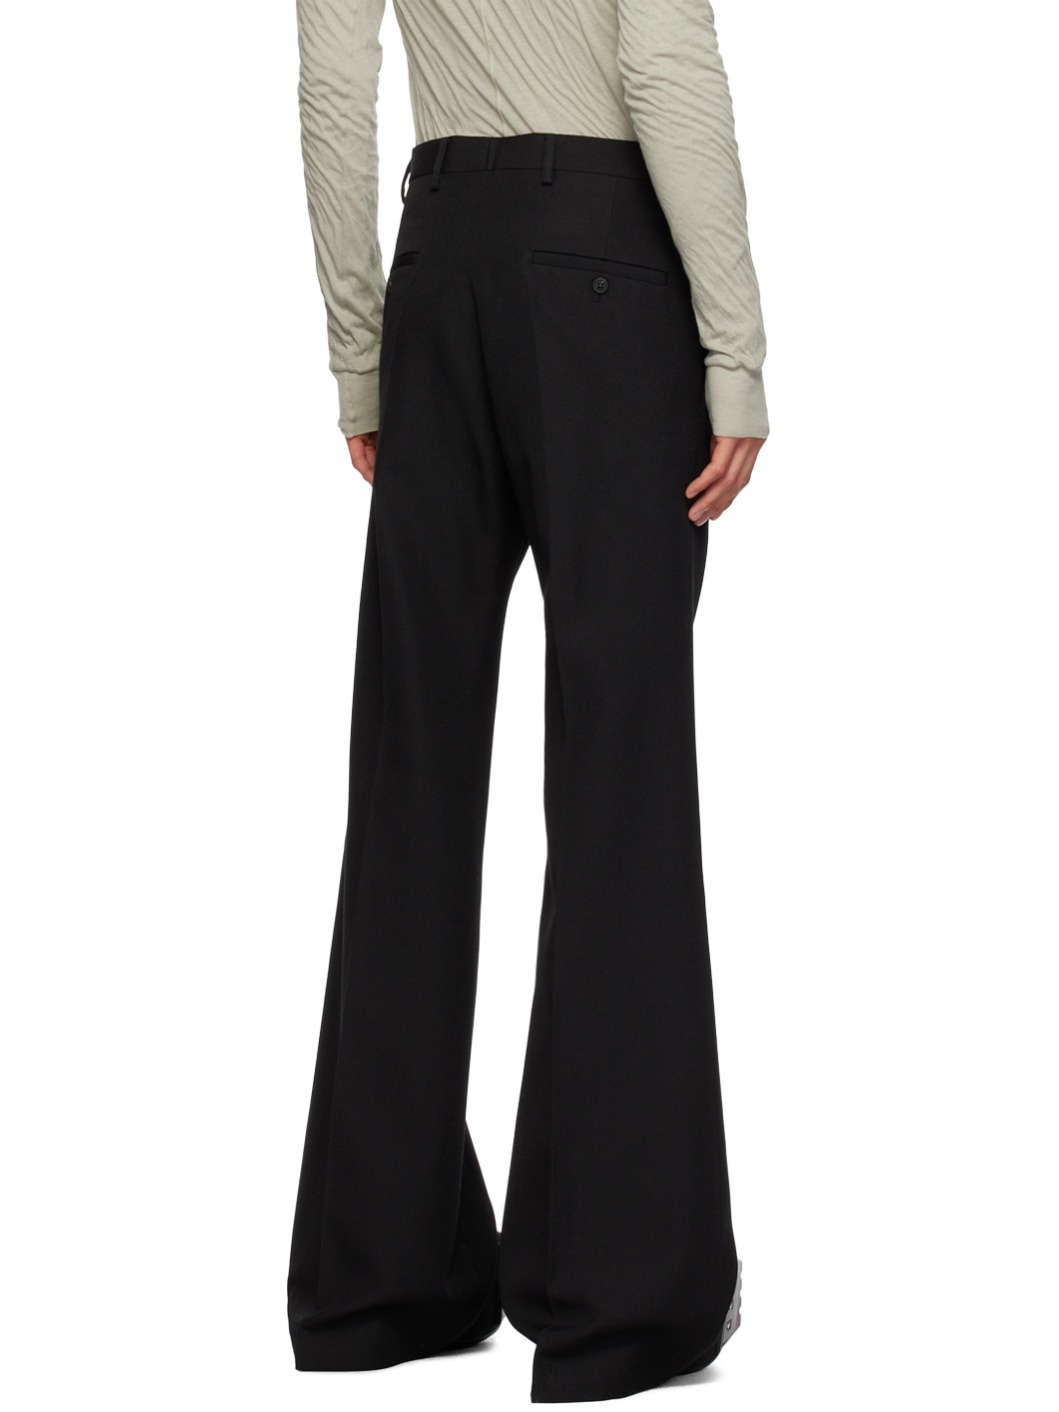 Black Astaires Trousers - 3